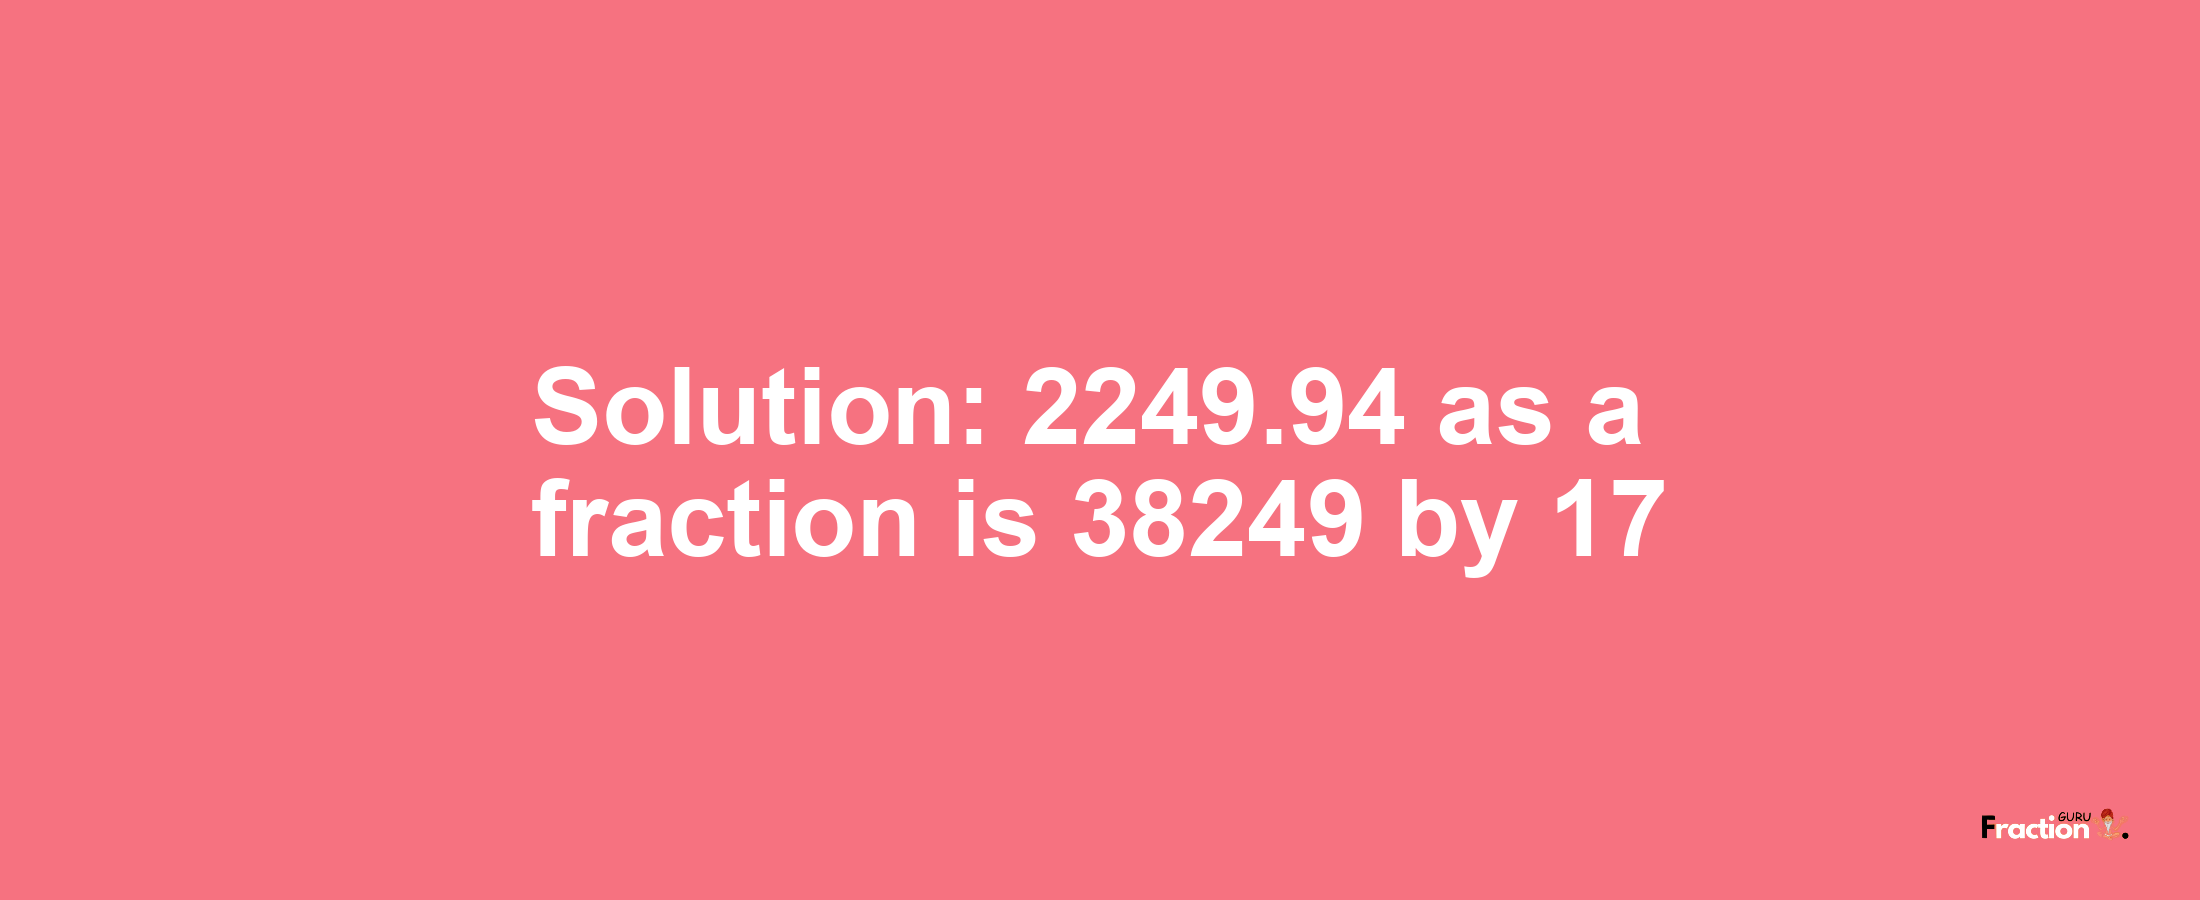 Solution:2249.94 as a fraction is 38249/17